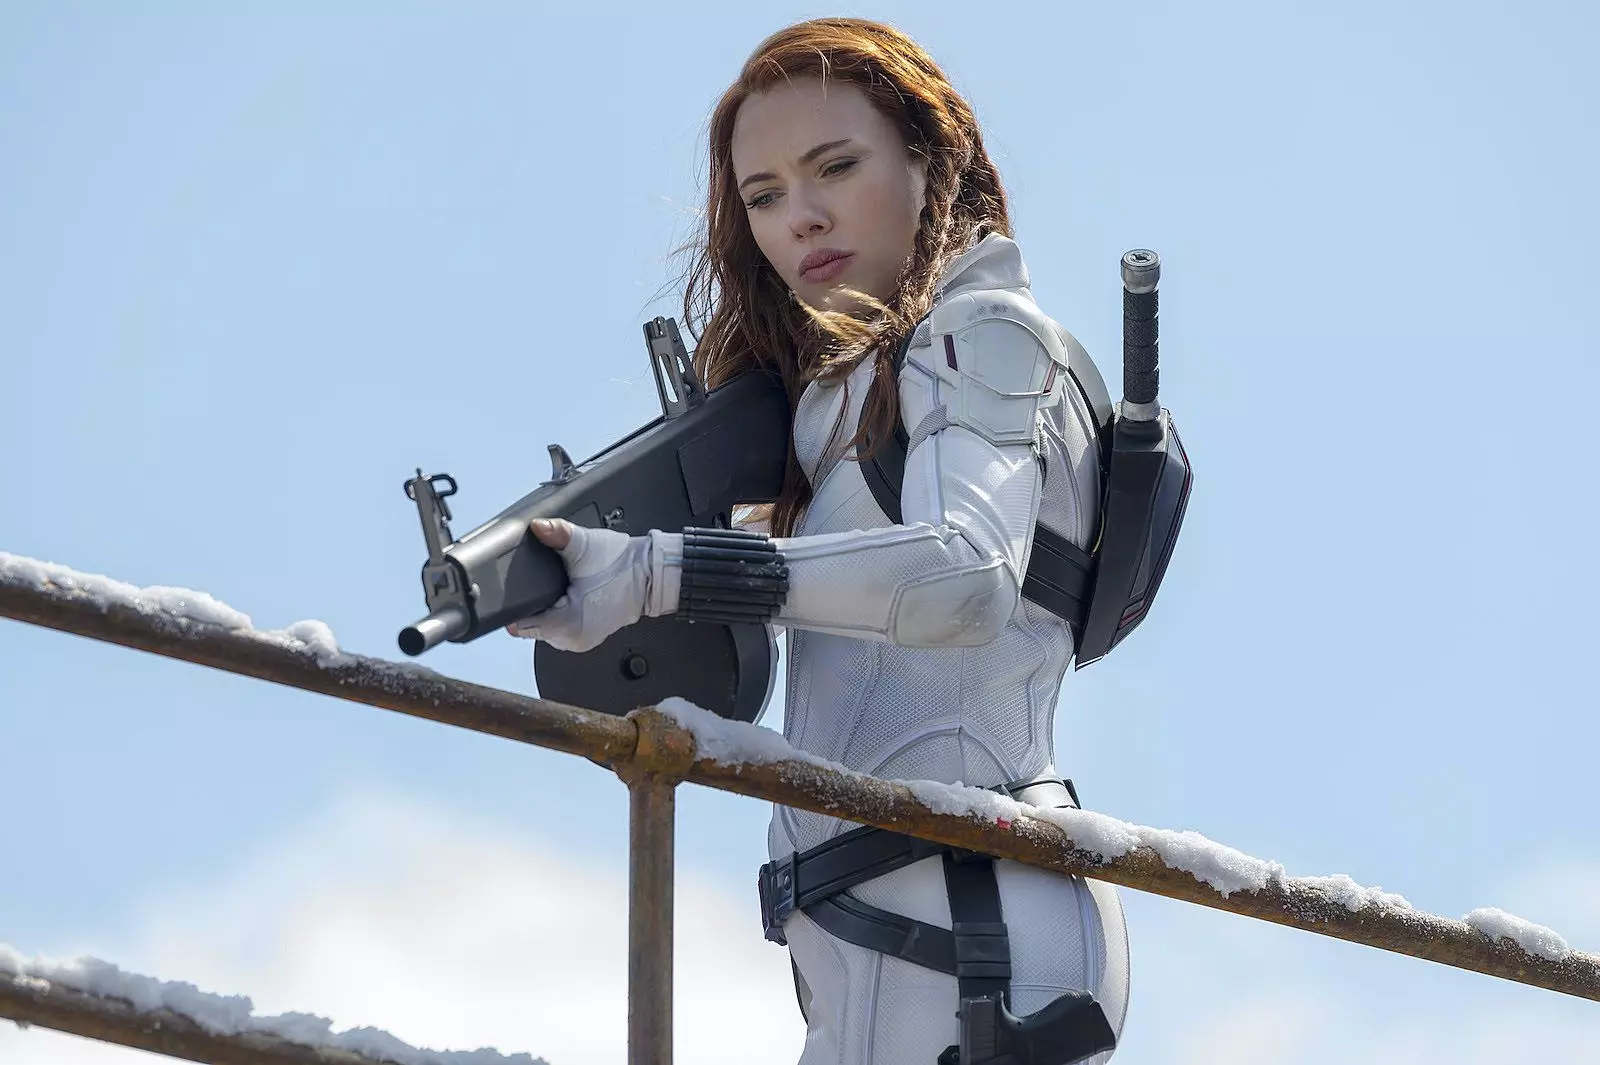 Marvel must work a miracle with Scarlett Johansson's Black Widow, Avengers: Endgame